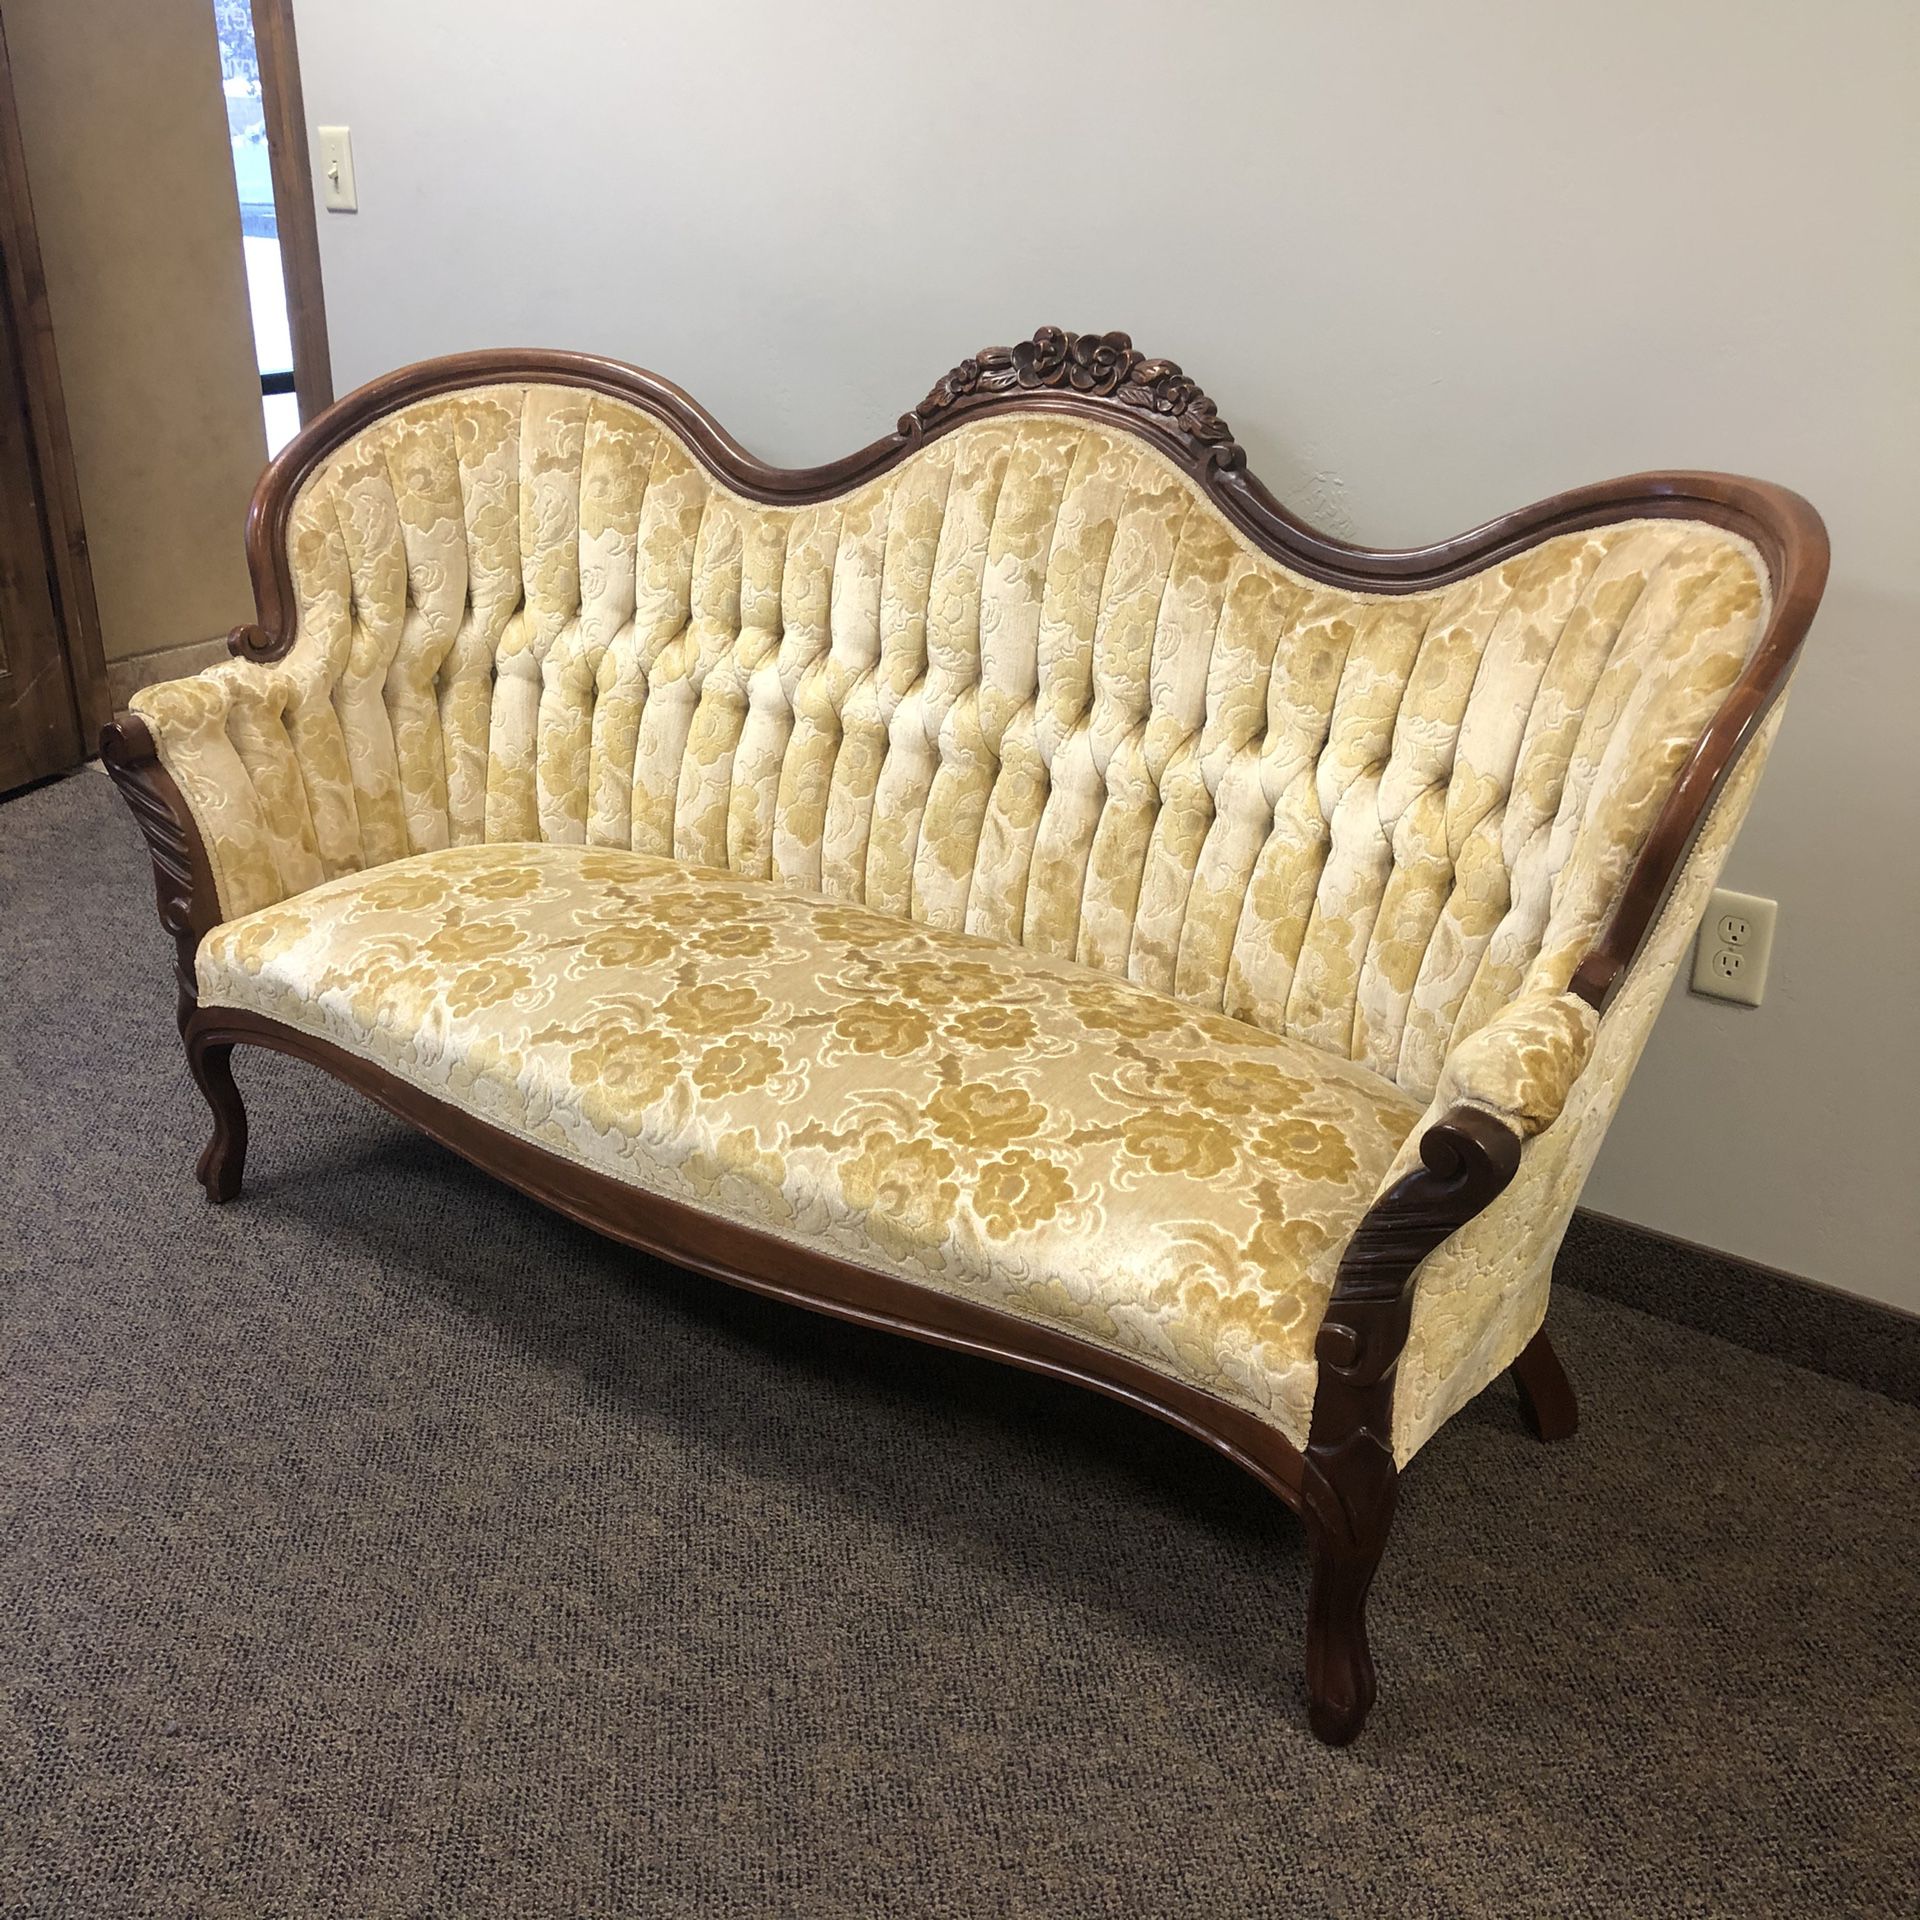 Beautiful Vintage Victorian style sofa/couch